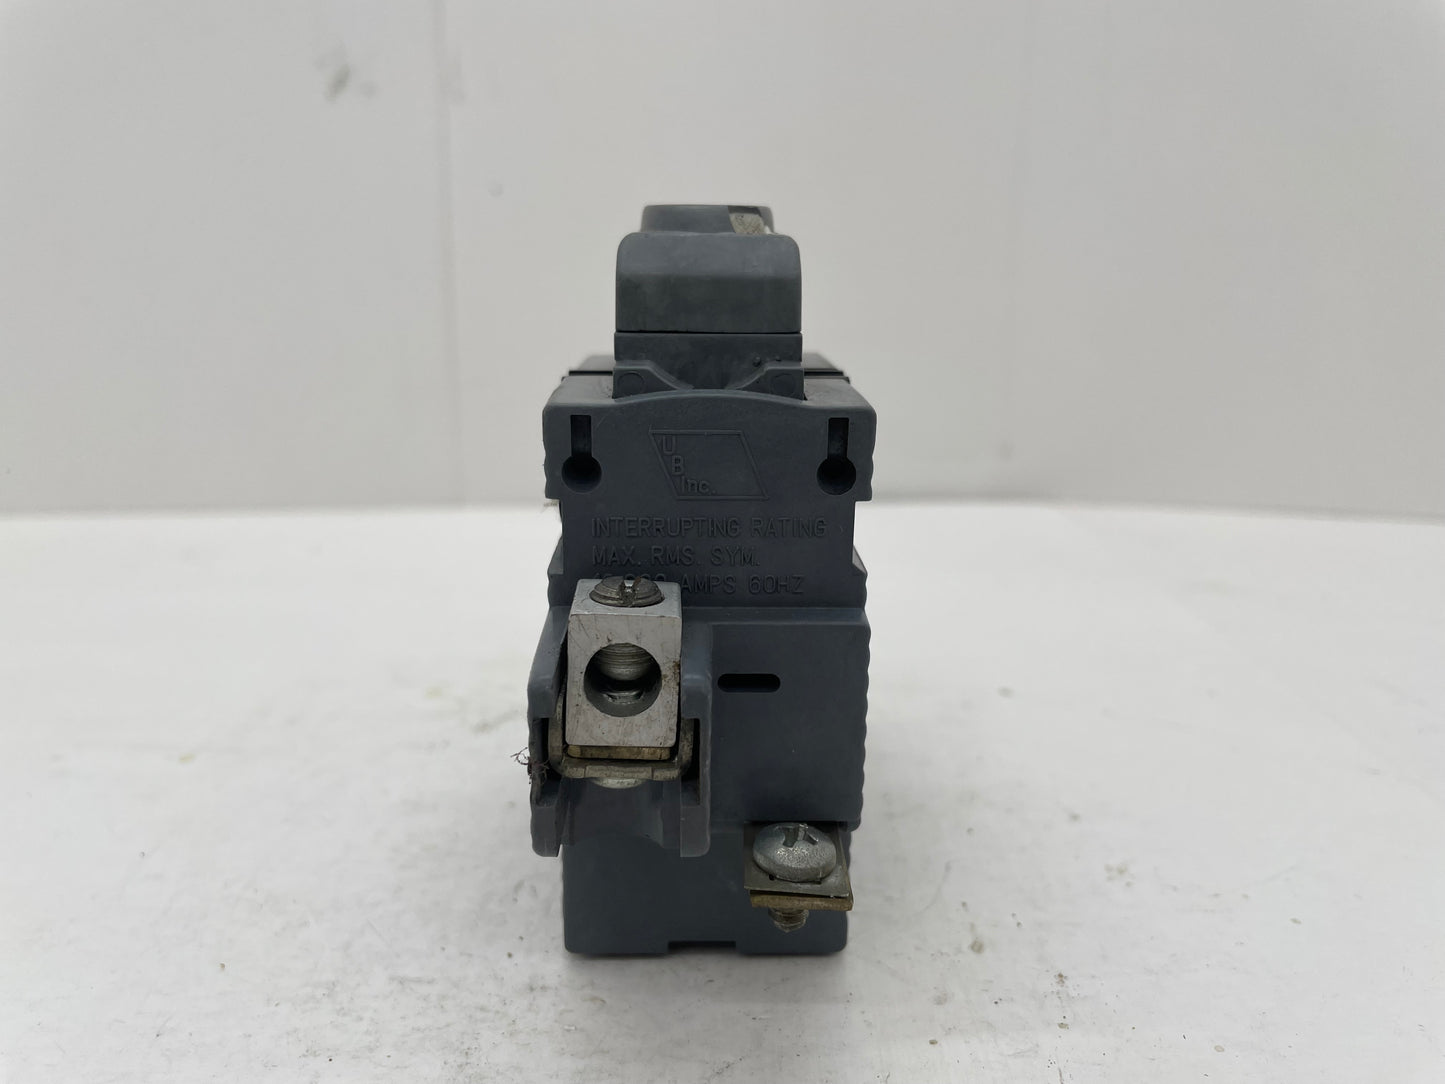 Connecticut Electric UBIP240 2P 40A Pushmatic Replacement Circuit Breaker - Reconditioned